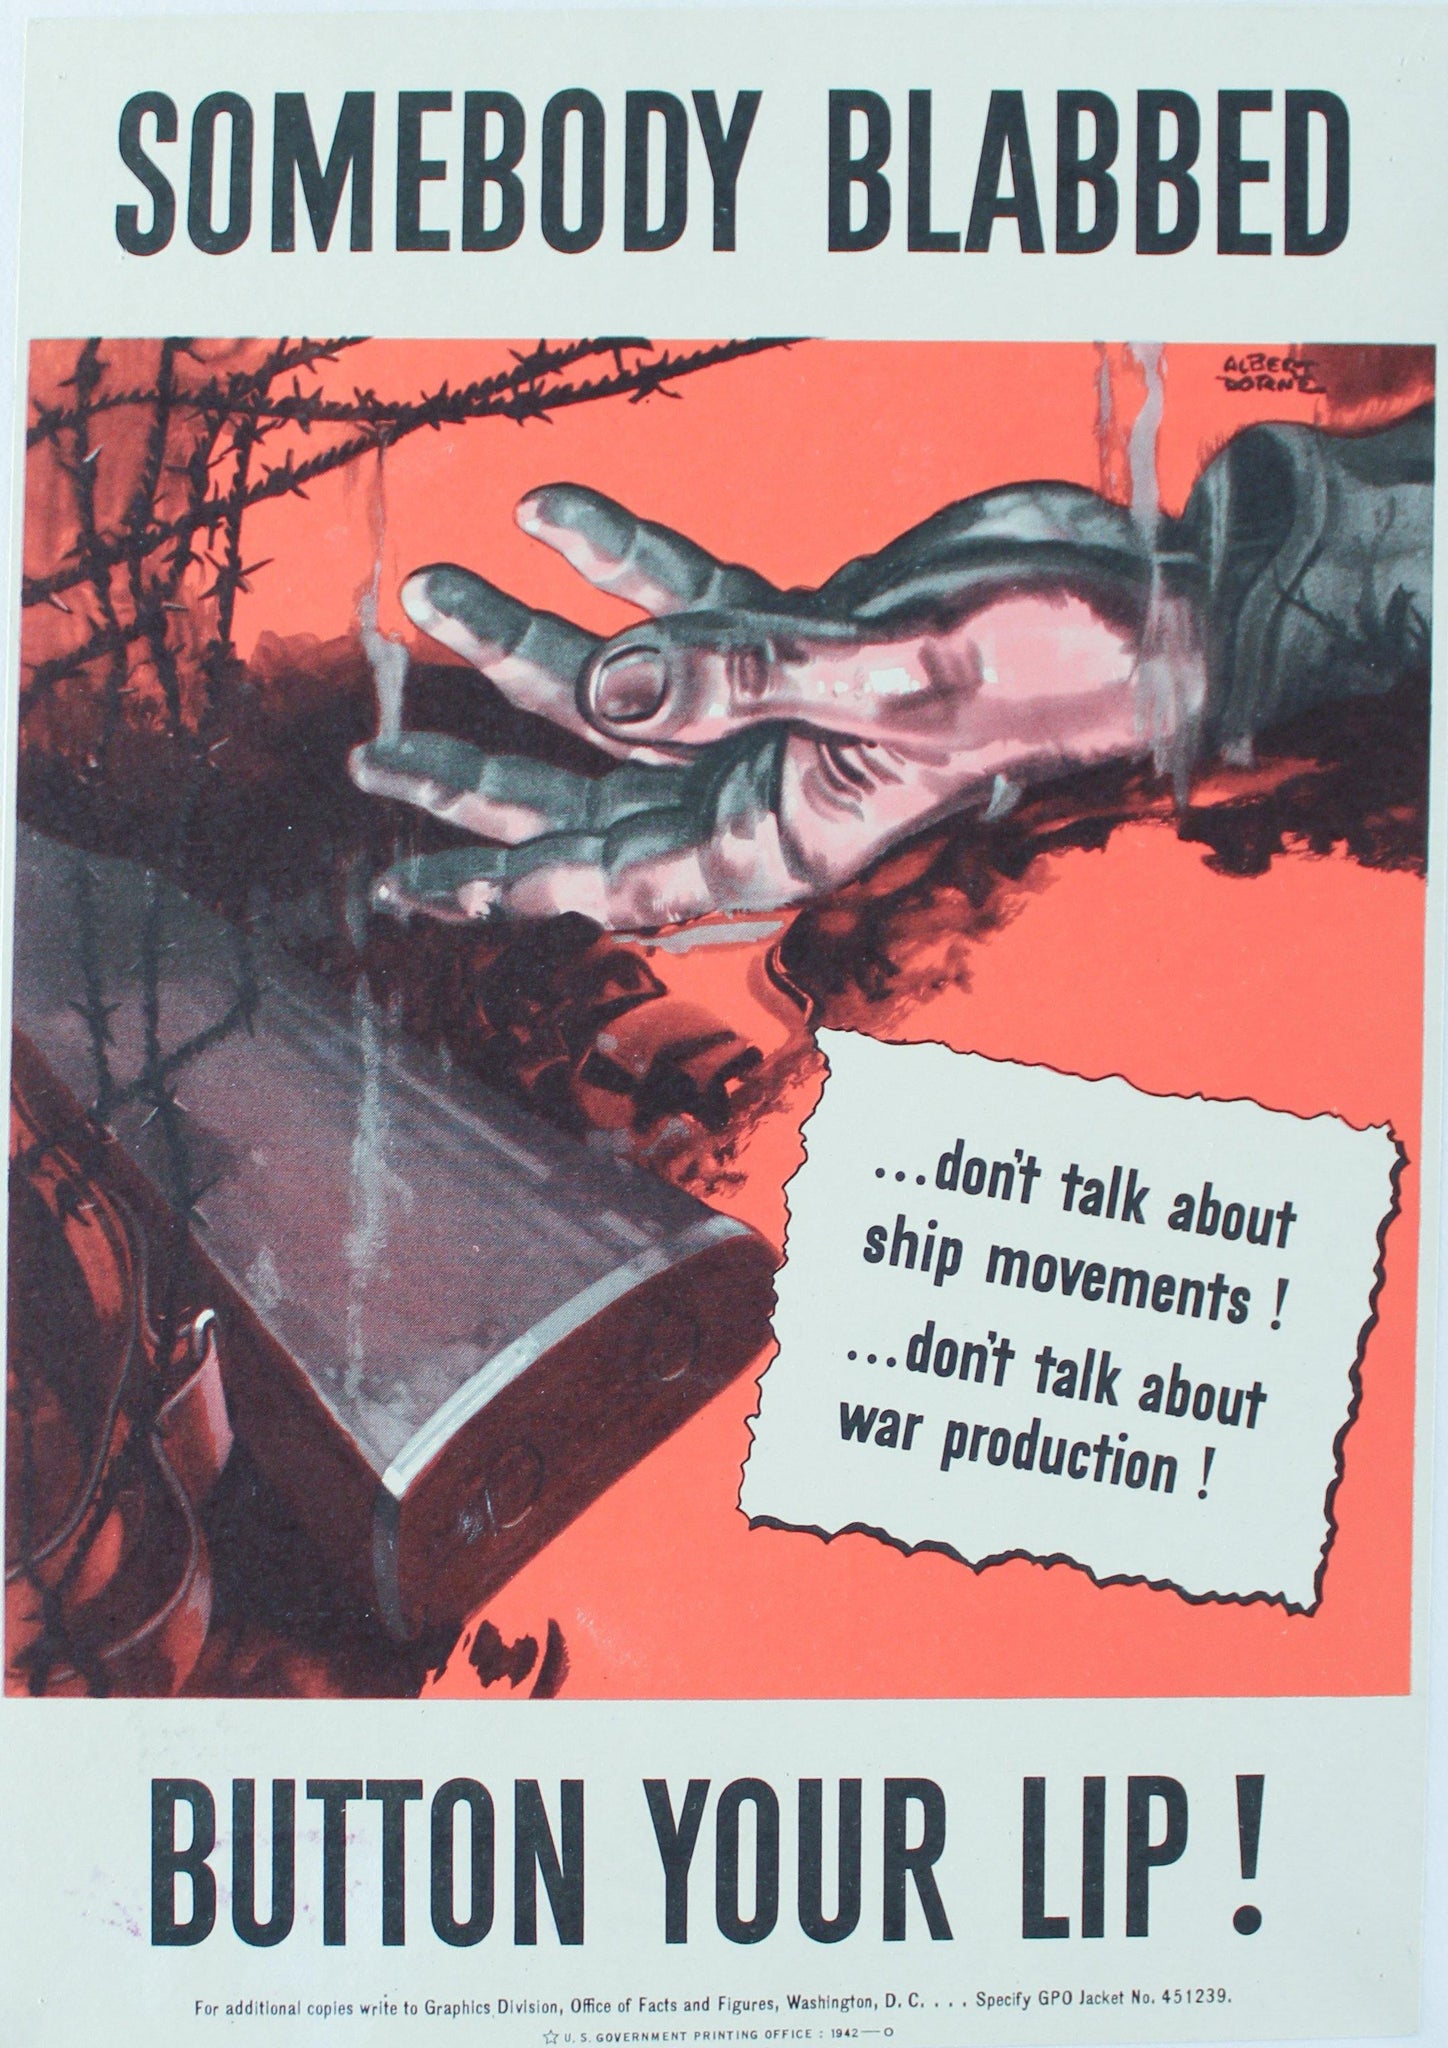 1942 Somebody Blabbed Don't Talk About Ship Movements! Button Your Lip! - Golden Age Posters